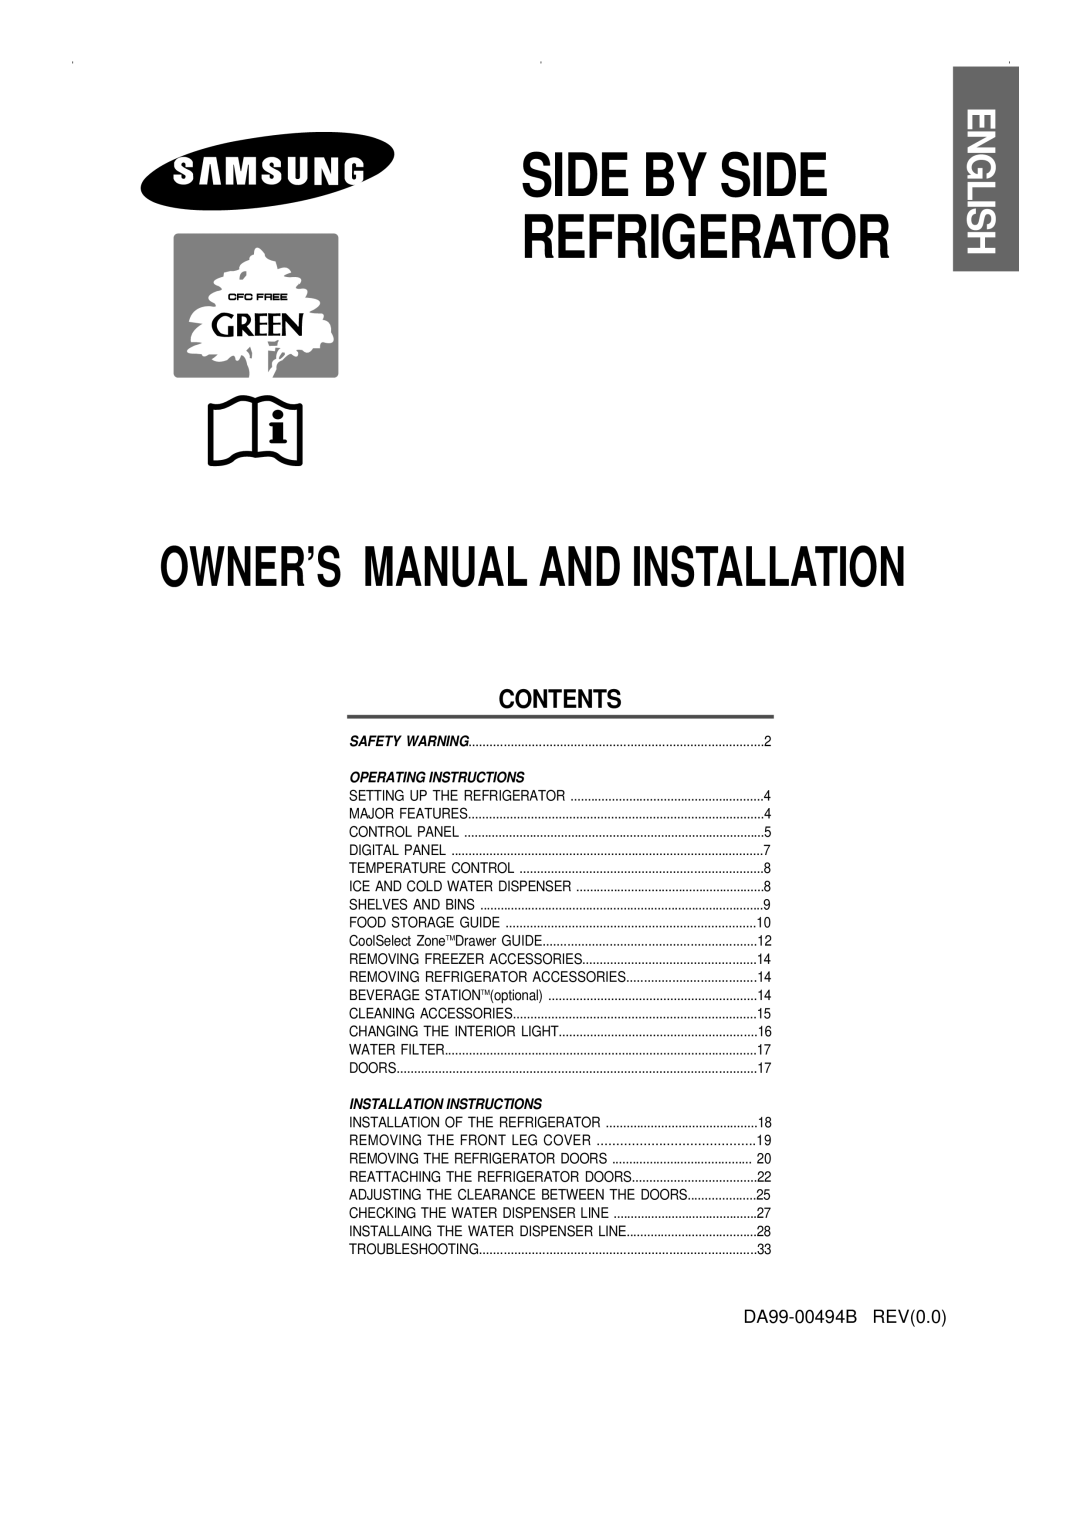 Samsung RS23KCSW owner manual English, Contents, Side By Side, Refrigerator, Operating Instructions 